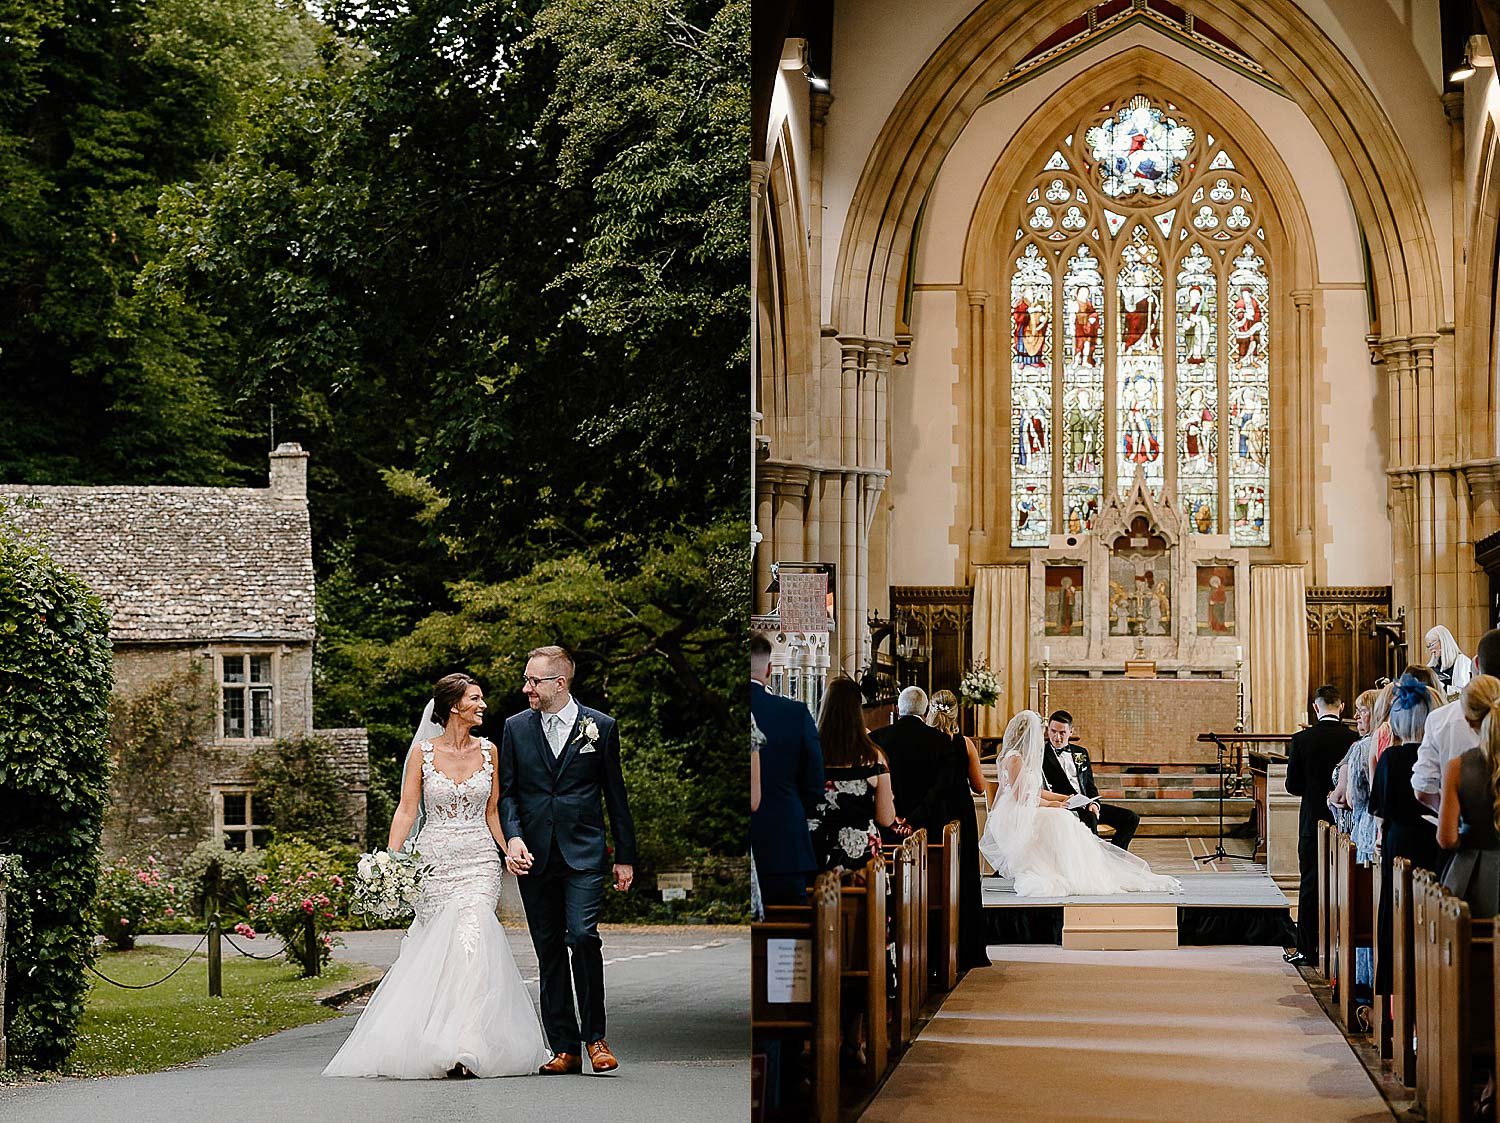 Oxfordshire and the cotswolds wedding photographer 2022 review023.jpg